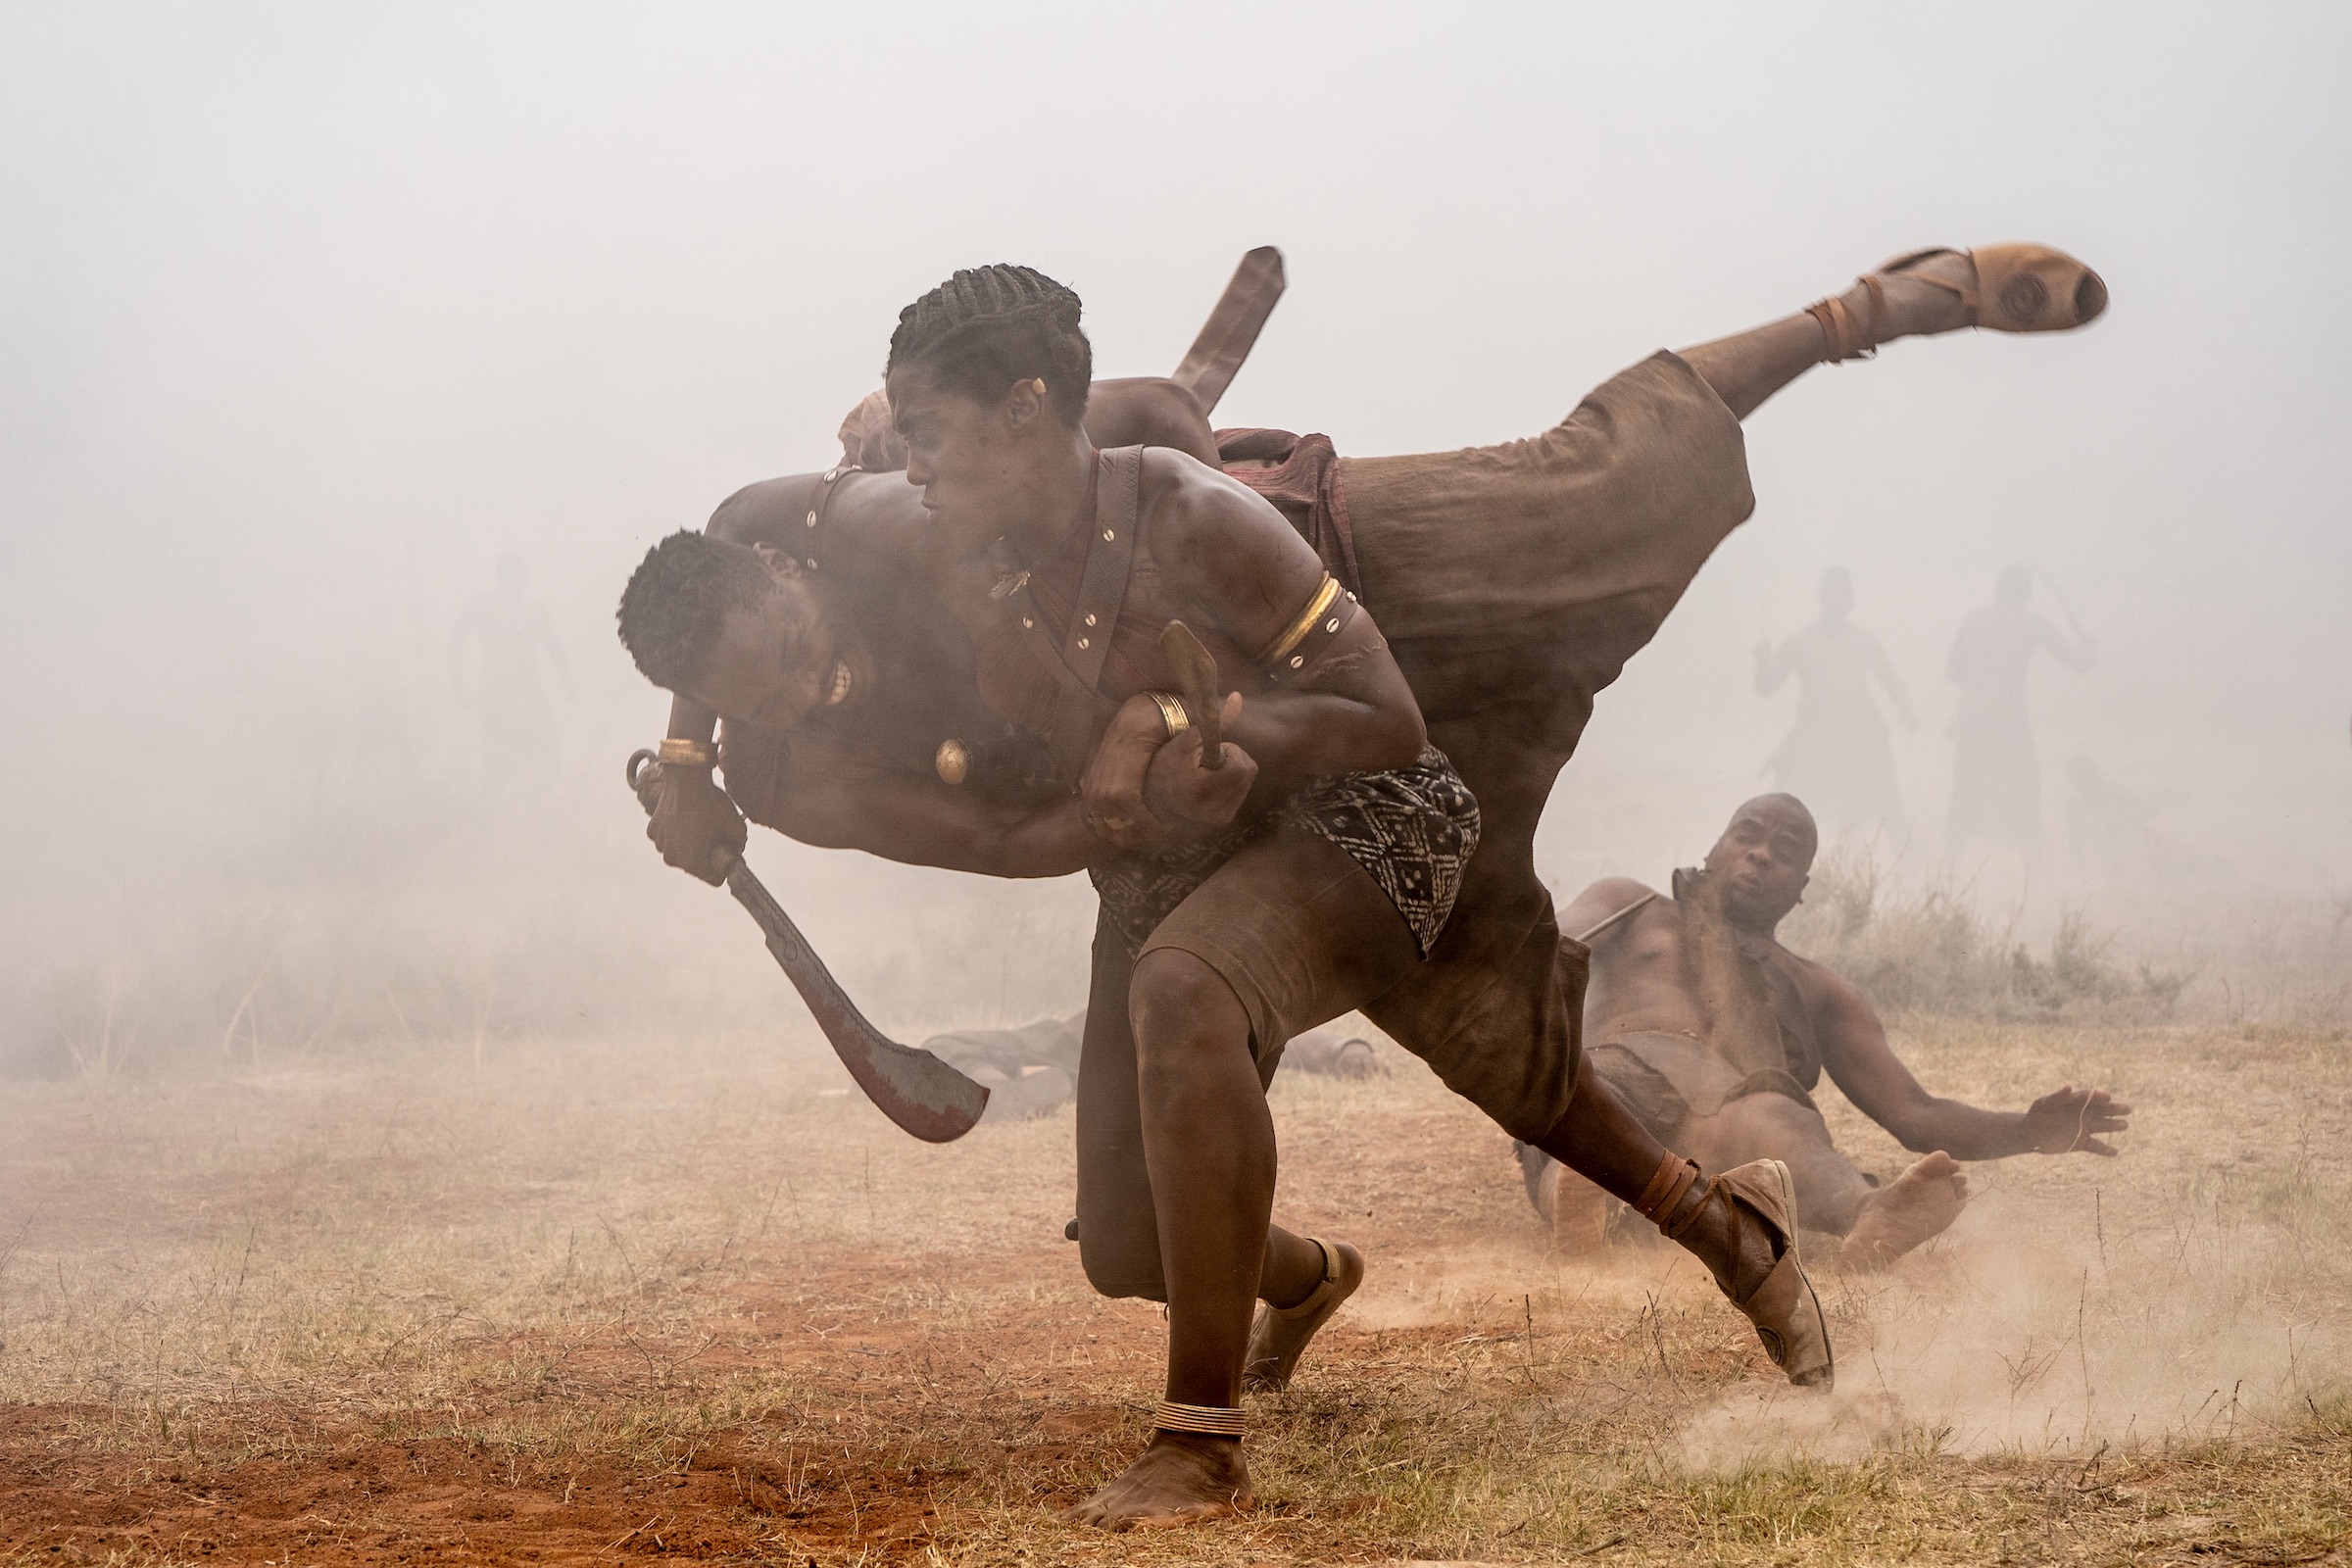 An African woman warrior tackles an African man onto the ground, sword wielded, in battle.